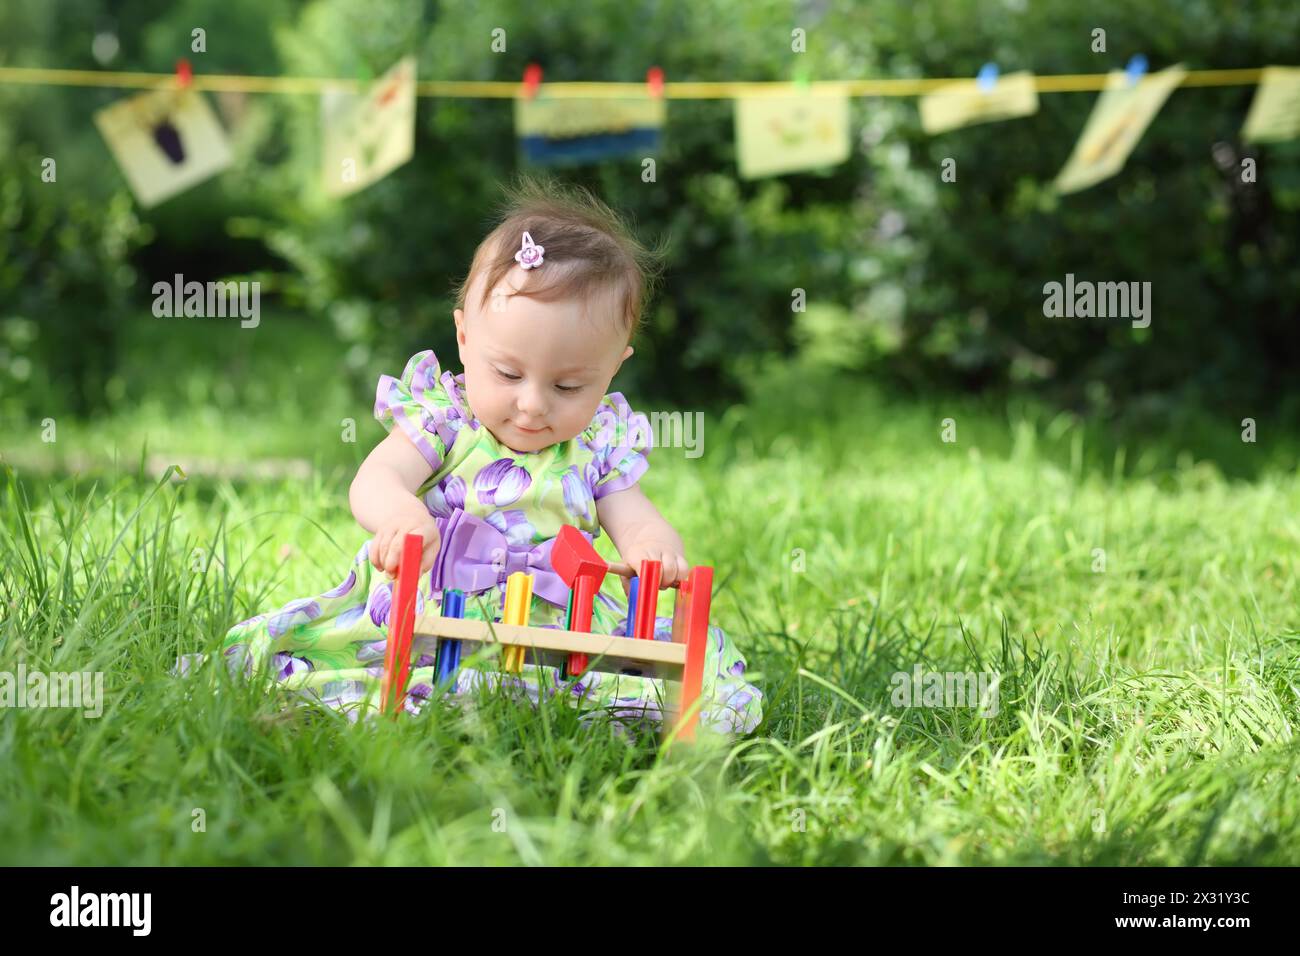 A little girl is playing with colorful wooden toys on the grass, in the background hanging kids drawings Stock Photo